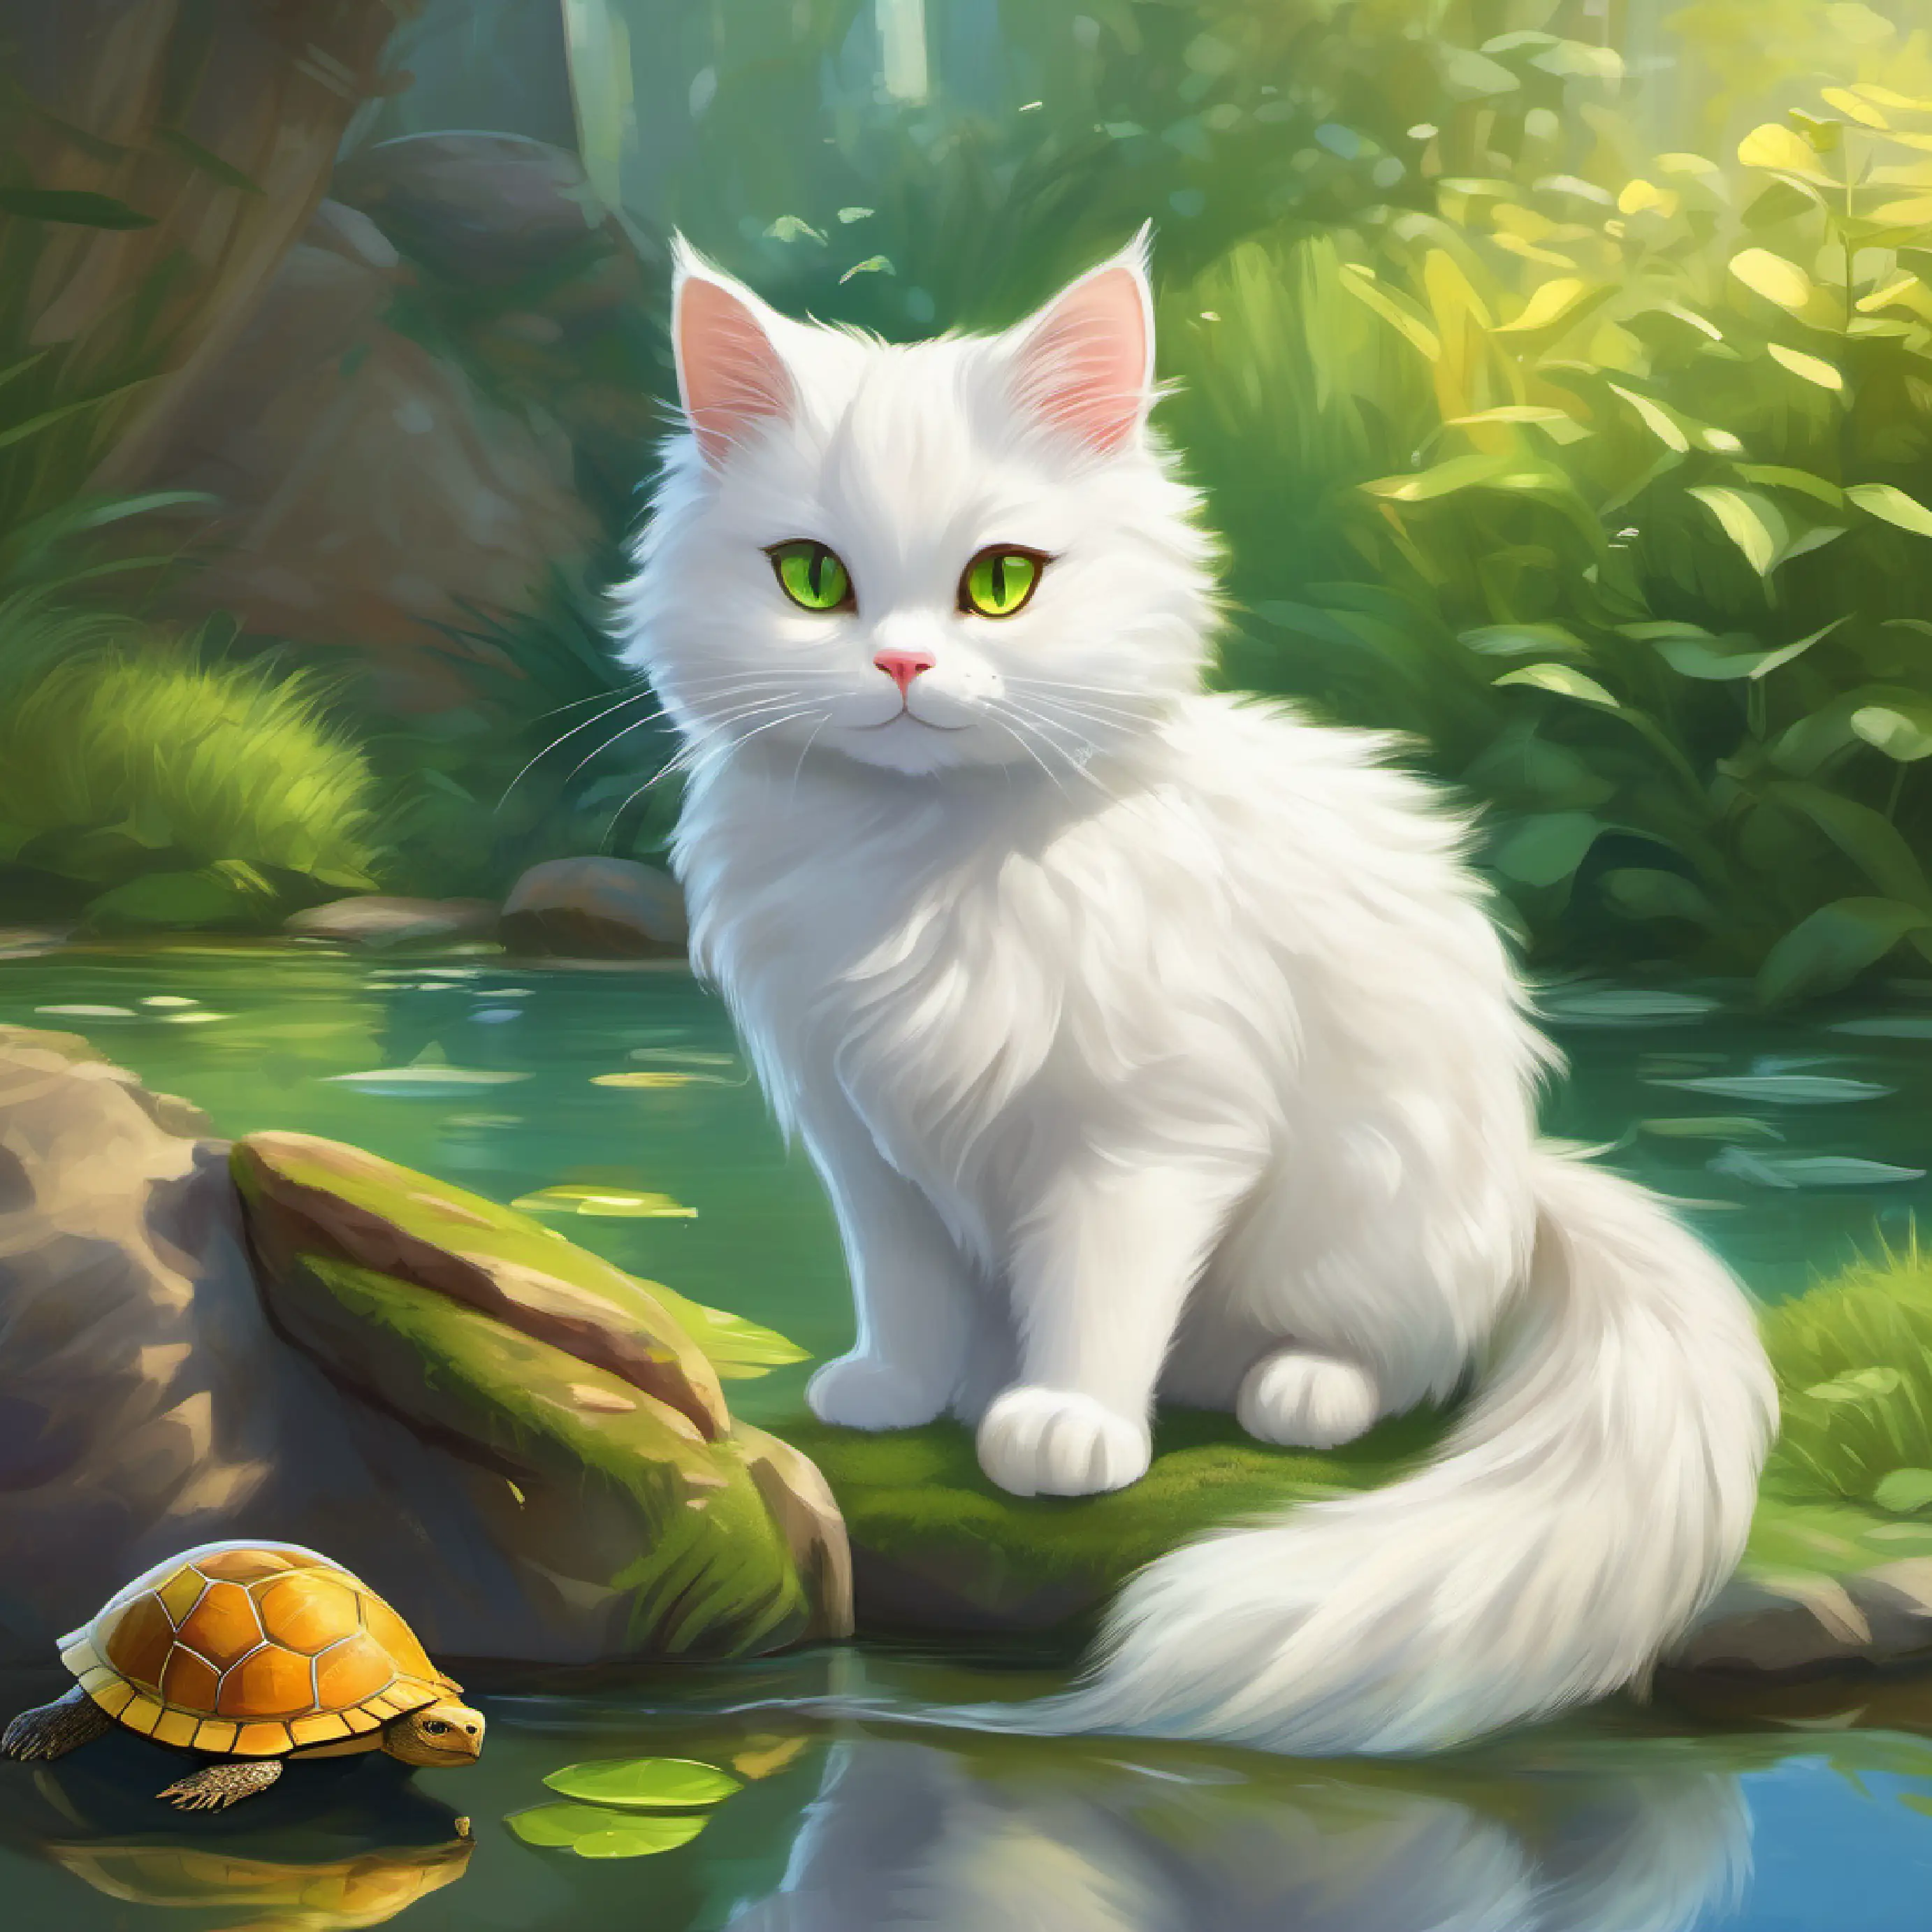 Fluffy white cat with yellow-green eyes, adventurous and Cheerful squirrel, helpful, likes to climb meet Turtle basking in the sun, kind, enjoys watching fish the turtle by the pond.